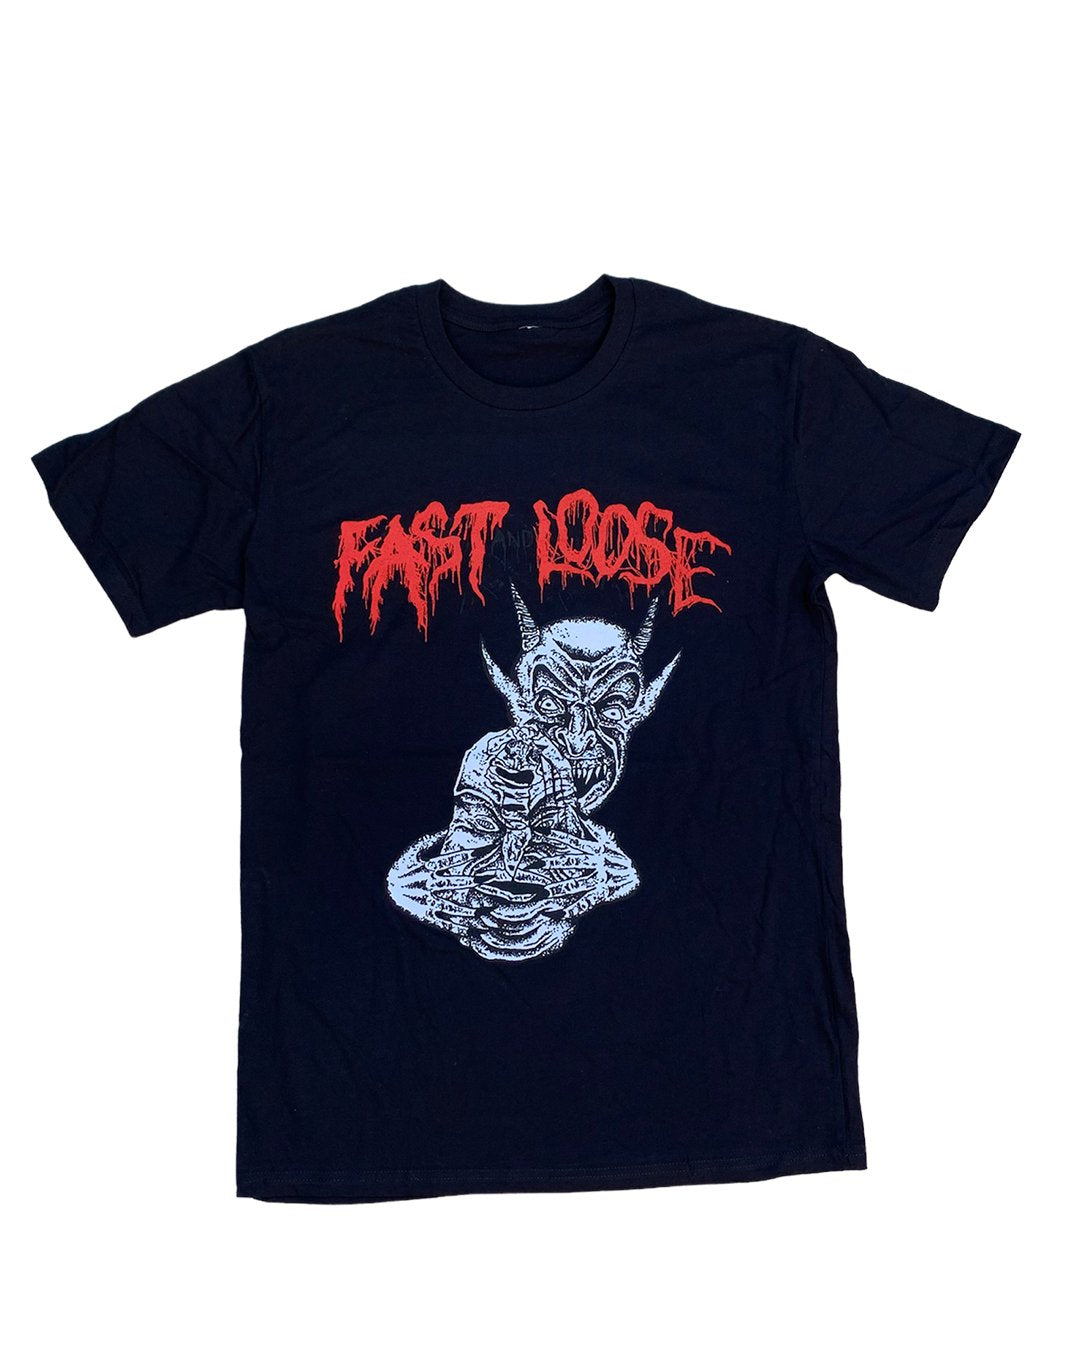 Fast And Loose Goblin tee